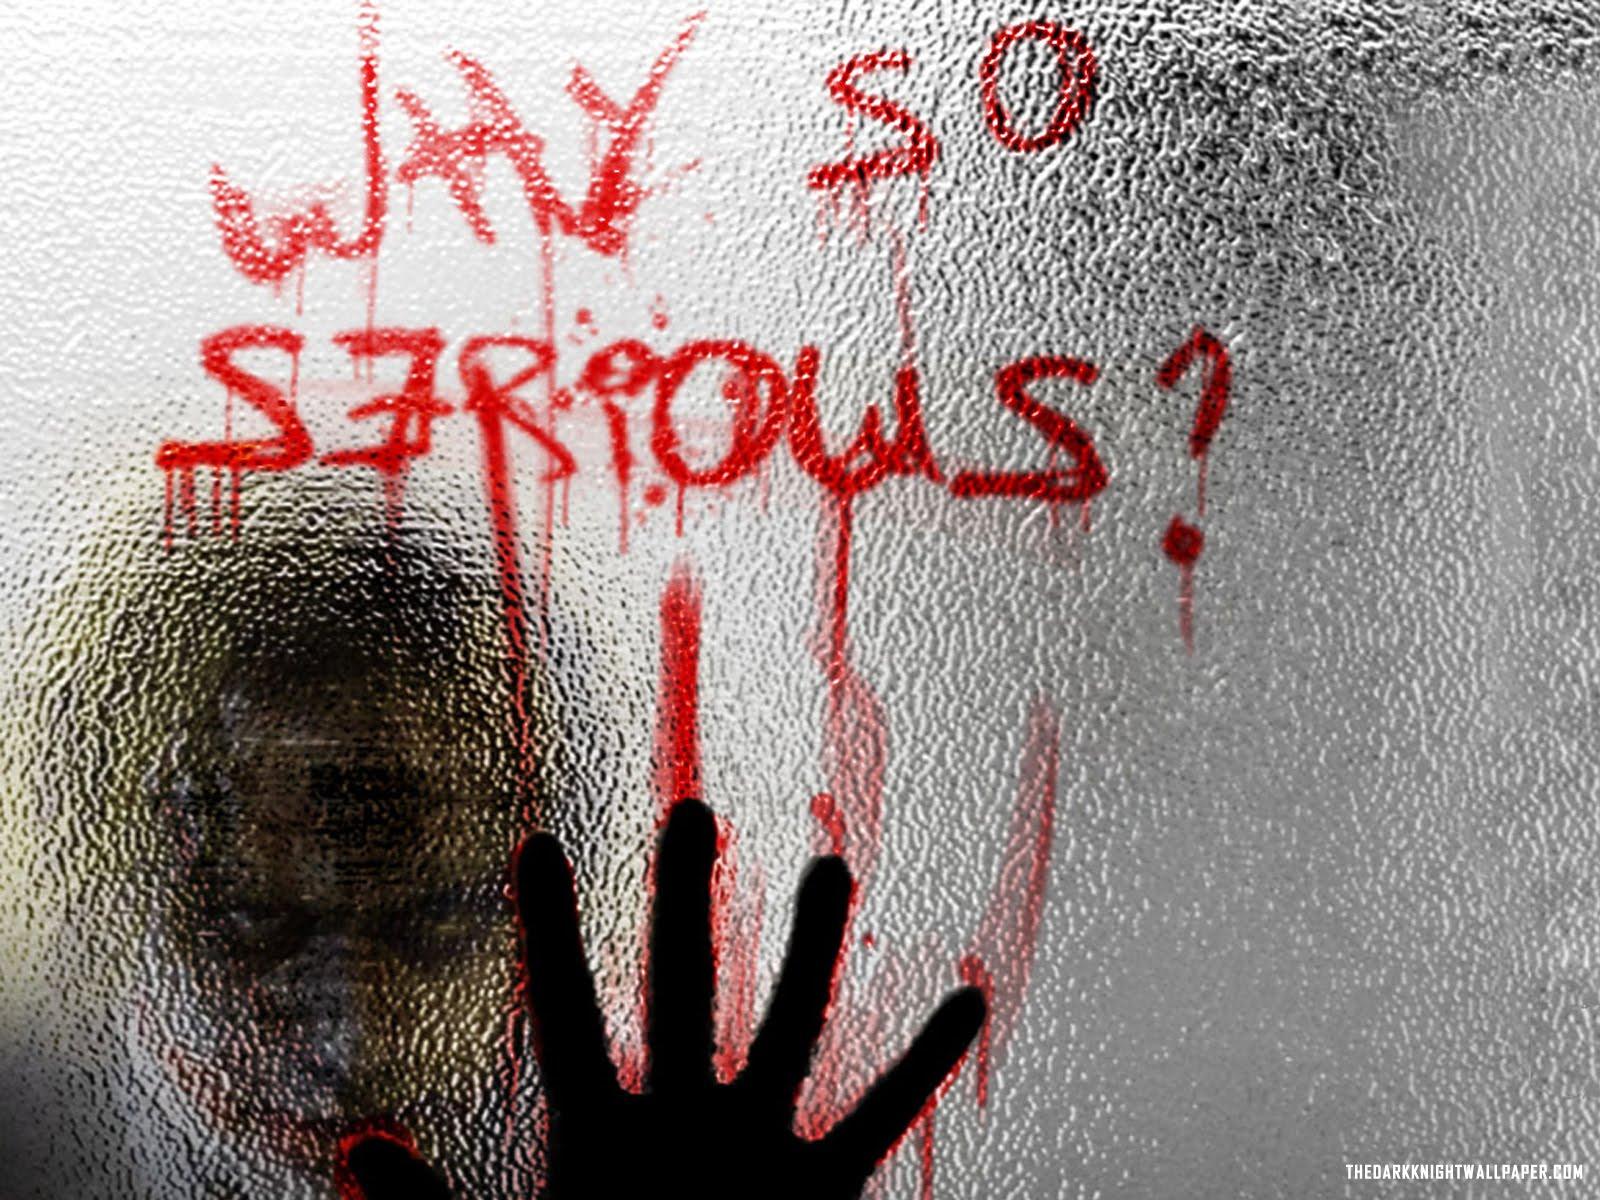 Why So Serious Wallpaper (19)